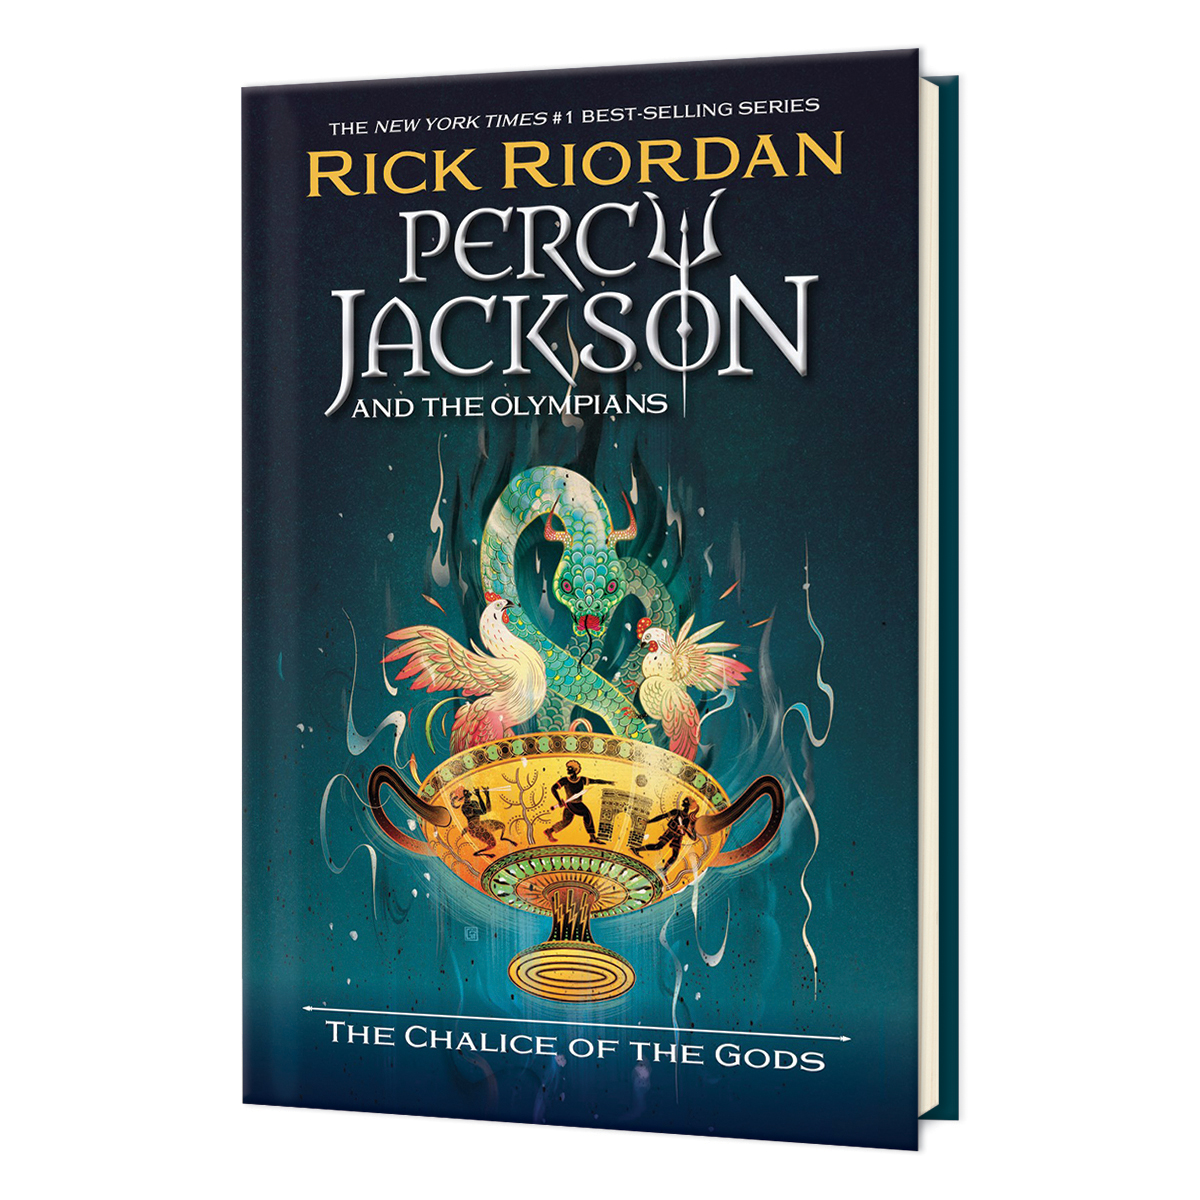  Percy Jackson and the Olympians: The Chalice of the Gods 